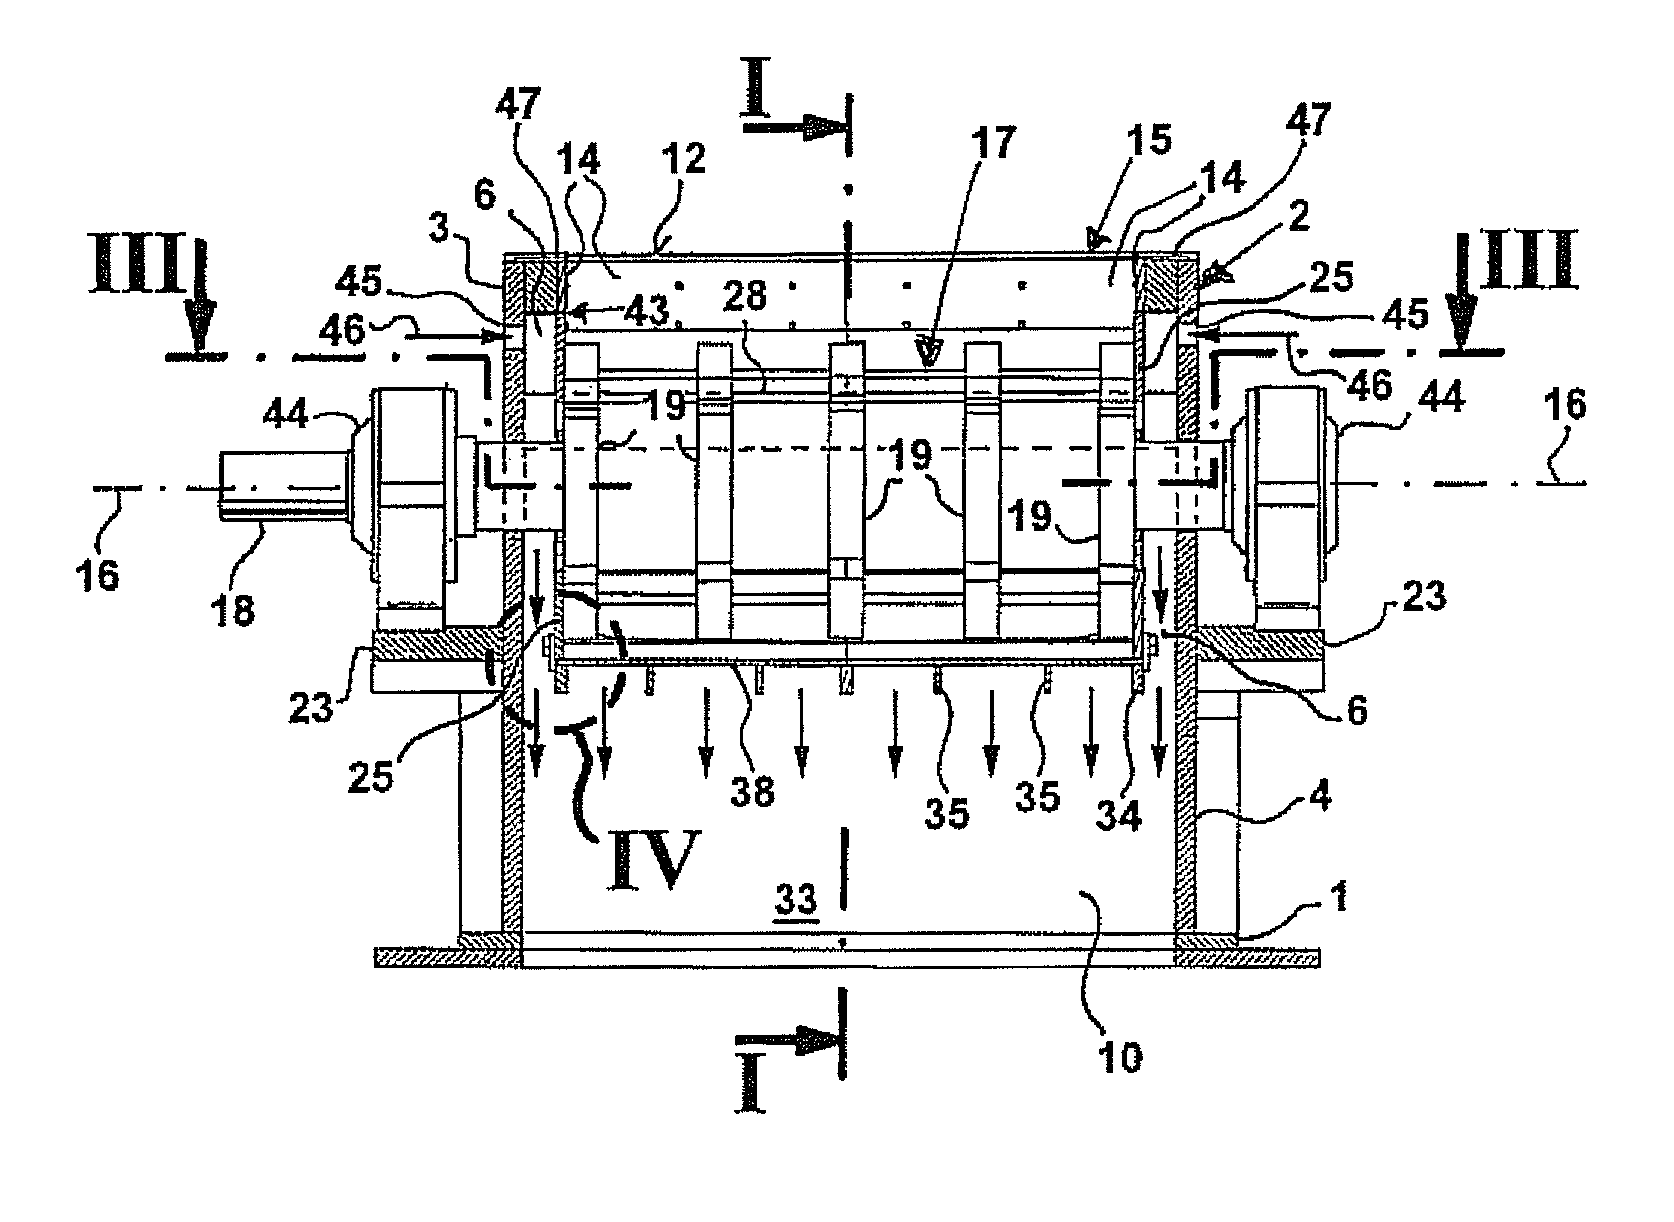 Device for comminution of feed material